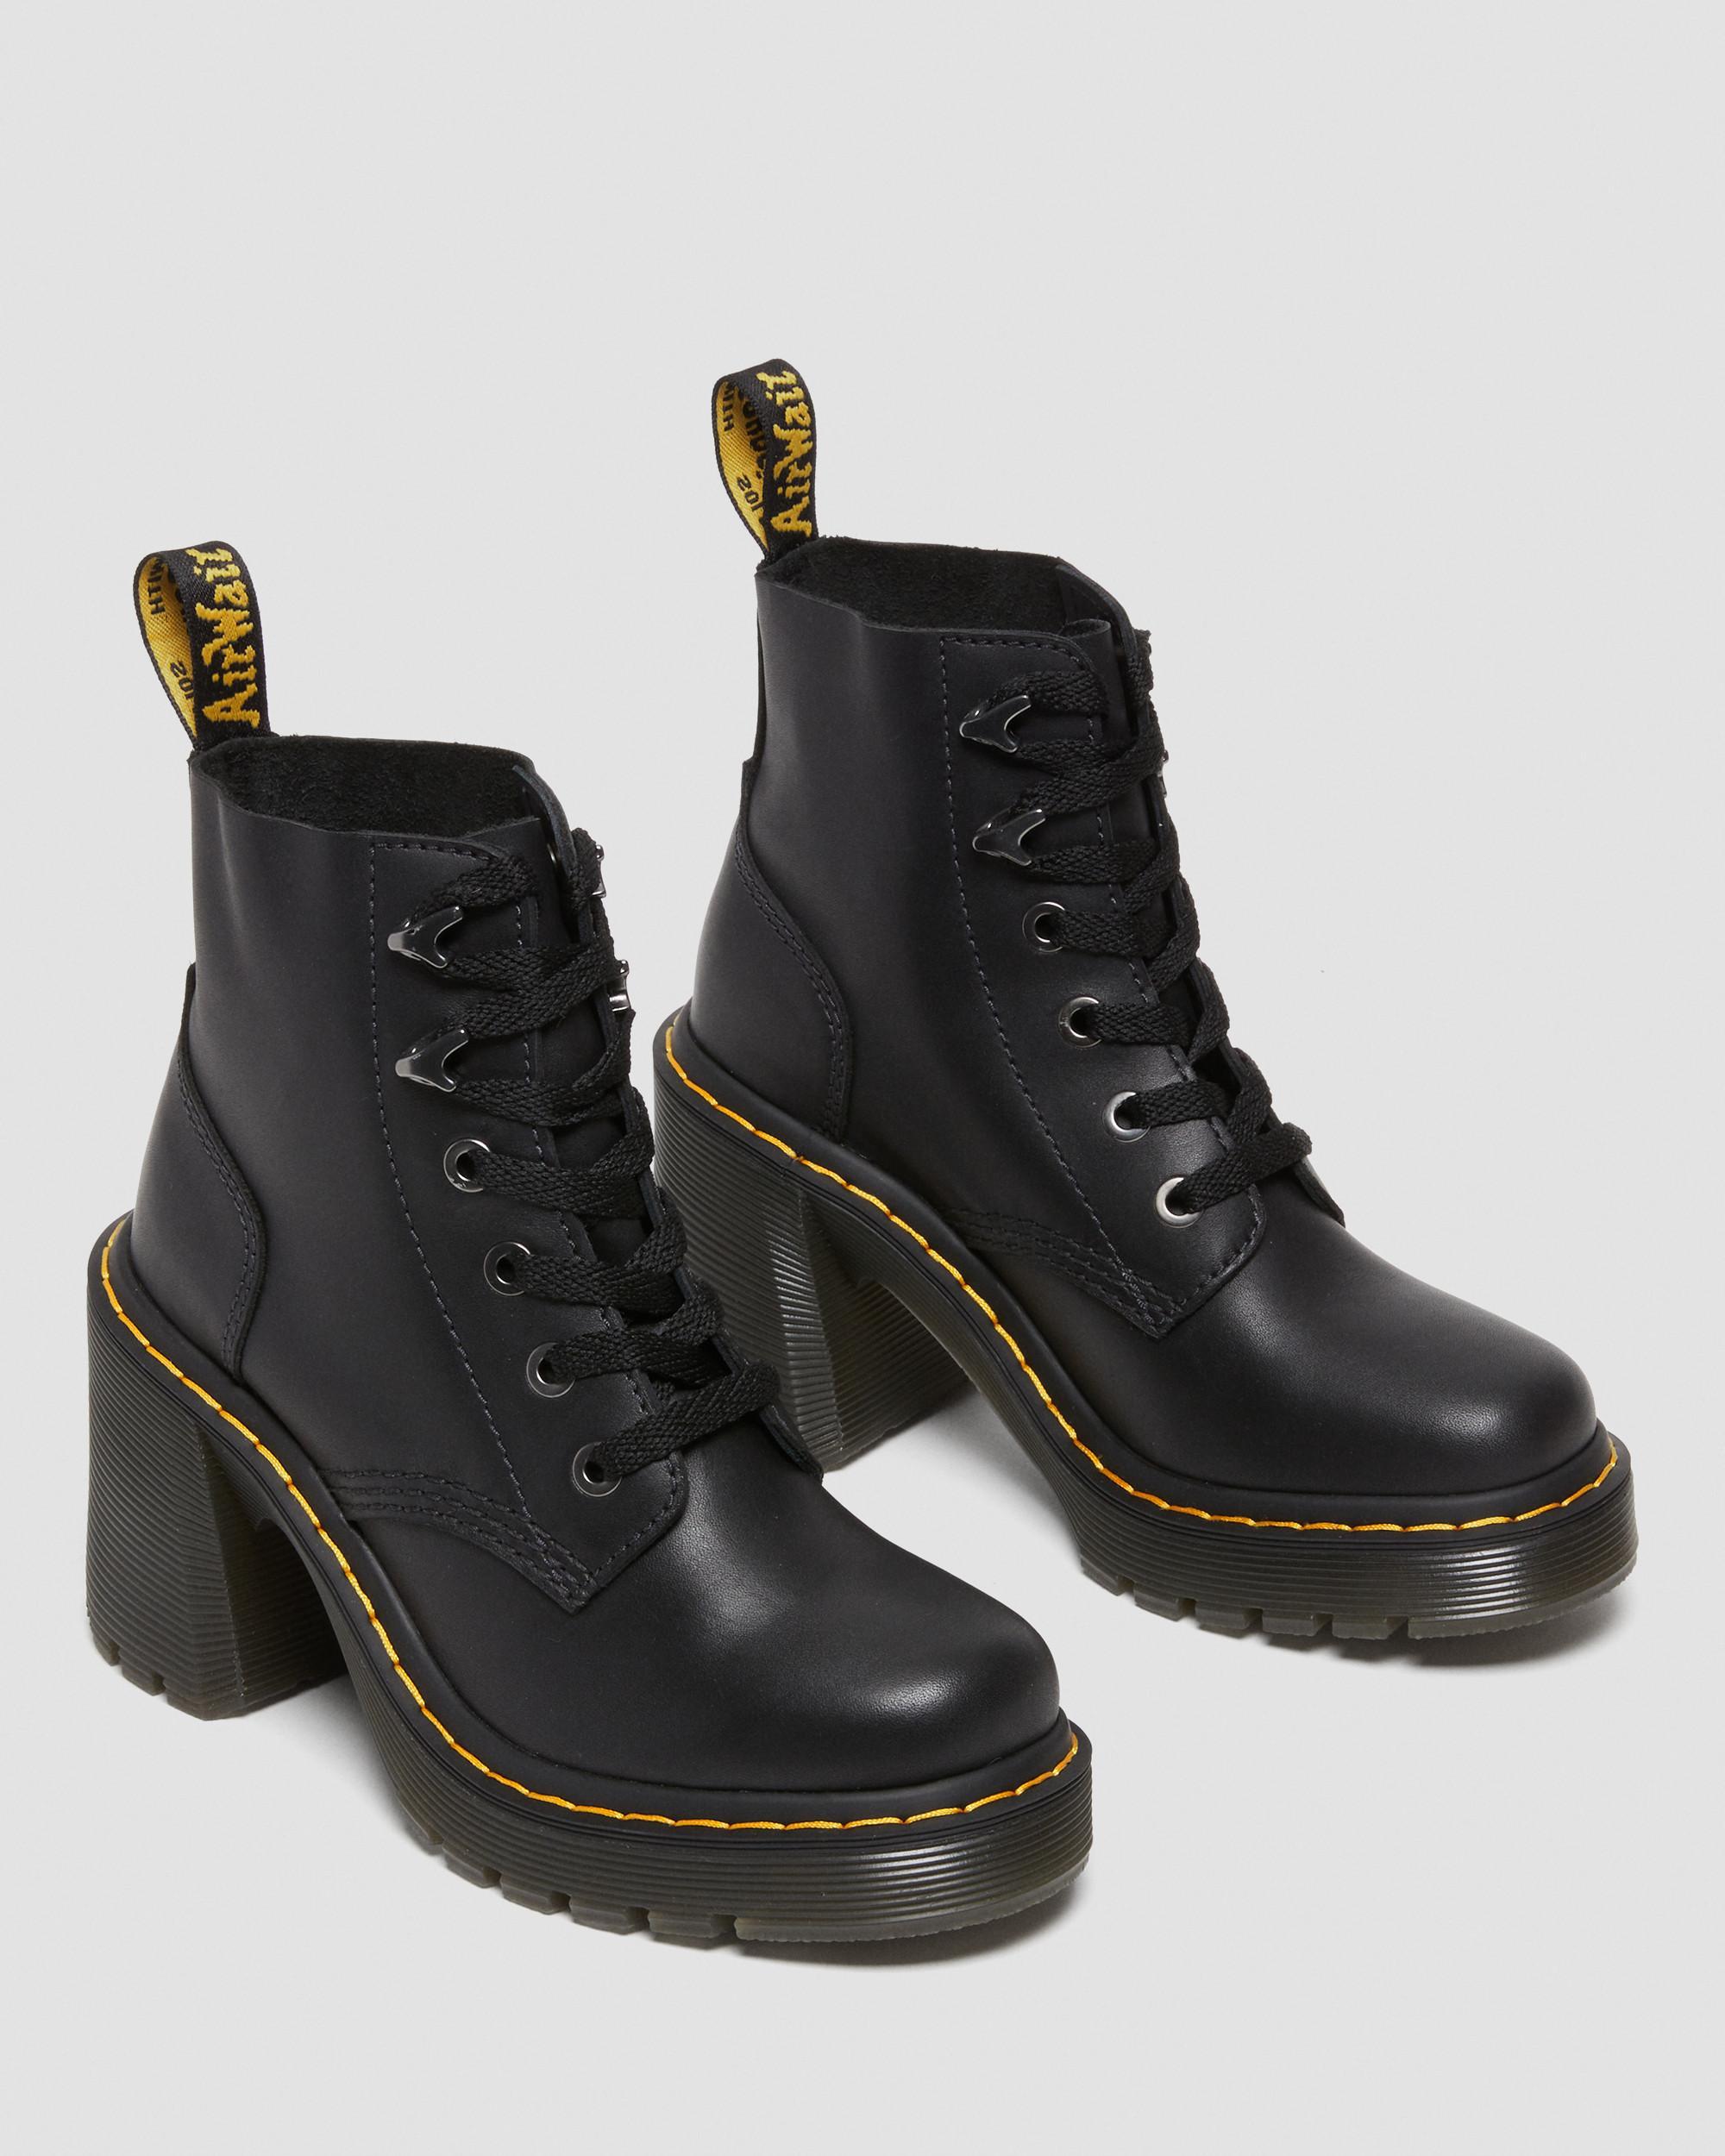 Dr. Martens Jesy Sendal Leather Lace Up Flared Heel Boots in Black | Lyst